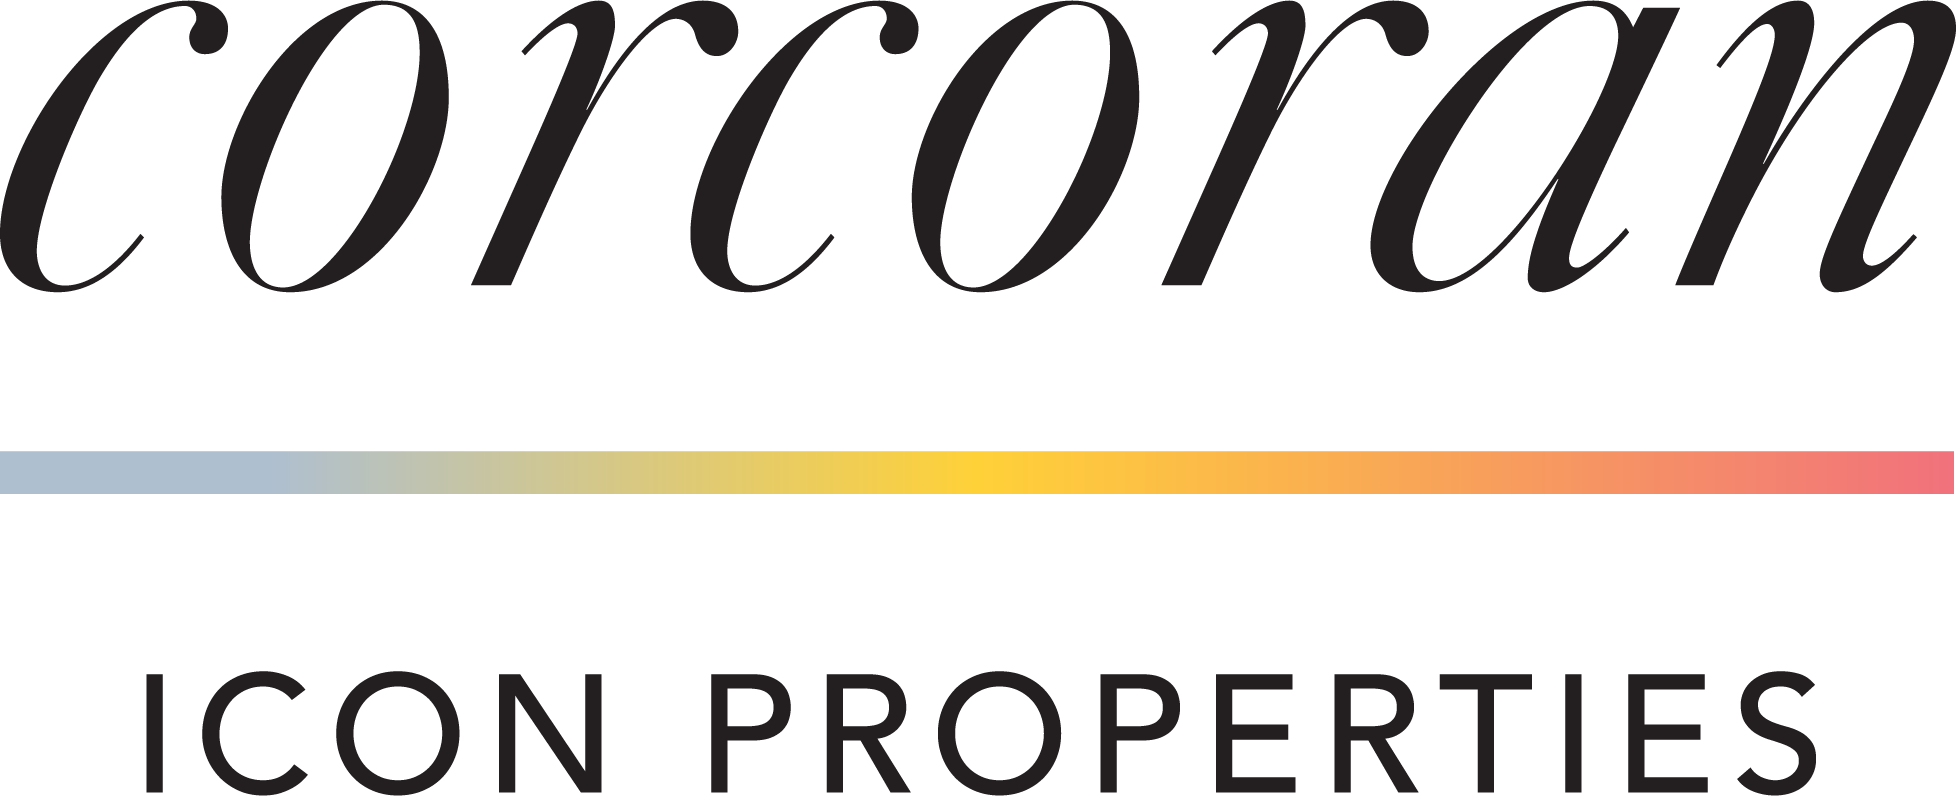 Corcoran Icon Properties - Wine Country